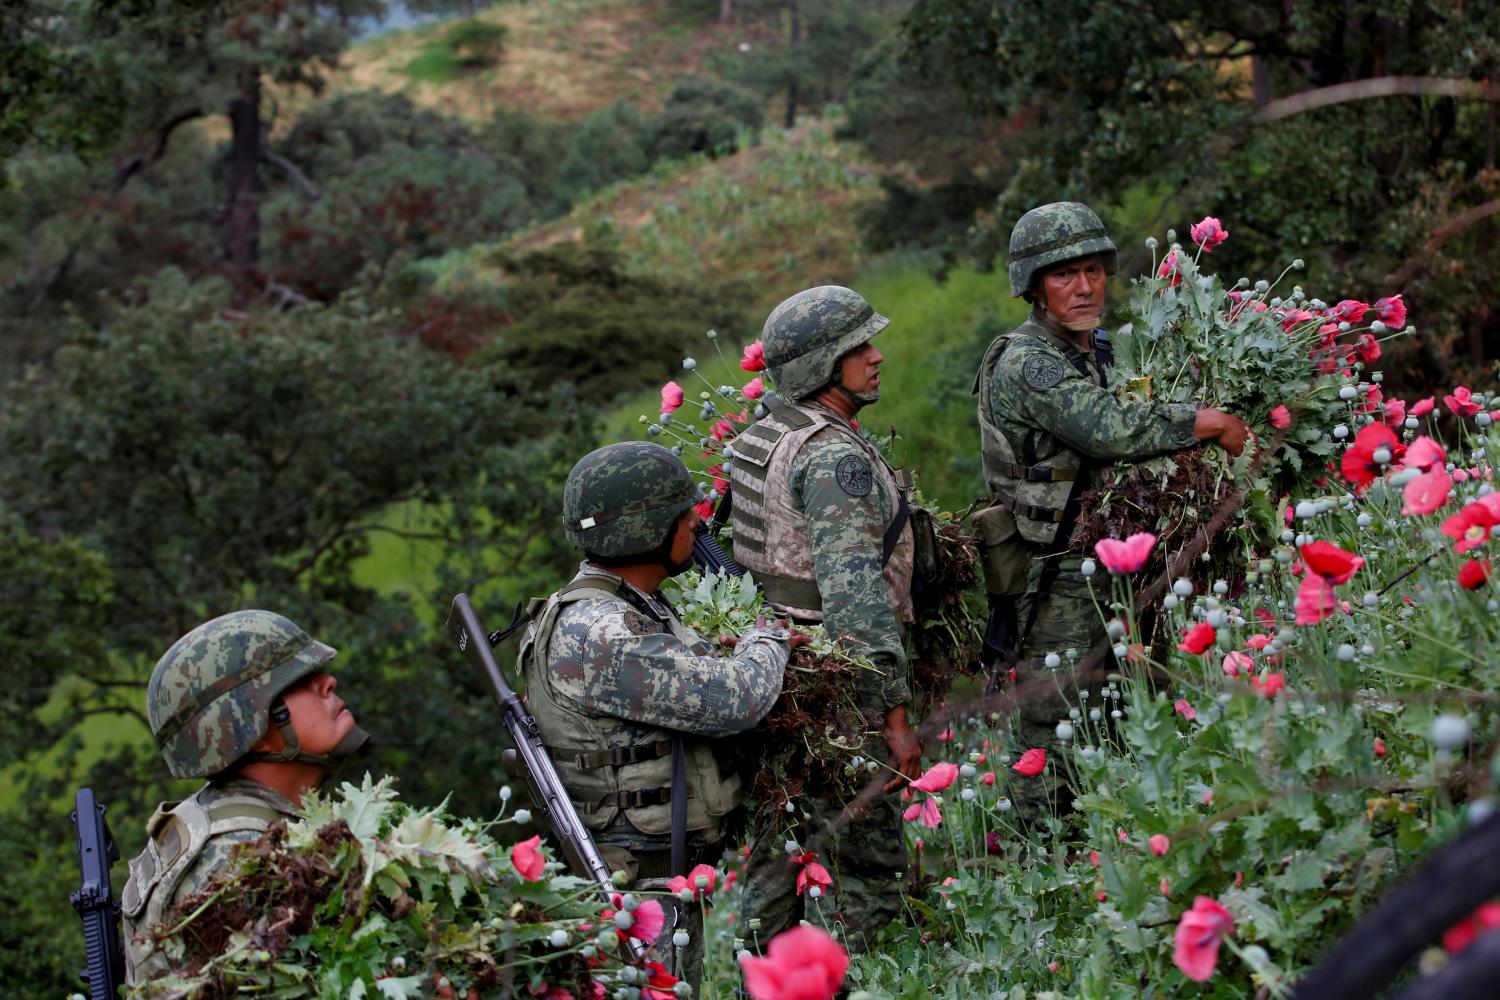 Soldiers cut opium poppies as they destroy a field of illegal plantation in the Sierra Madre del Sur, in the southern state of Guerrero, Mexico, August 25, 2018. REUTERS/Carlos Jasso  SEARCH "JASSO OPIUM" FOR THIS STORY. SEARCH "WIDER IMAGE" FOR ALL STORIES.